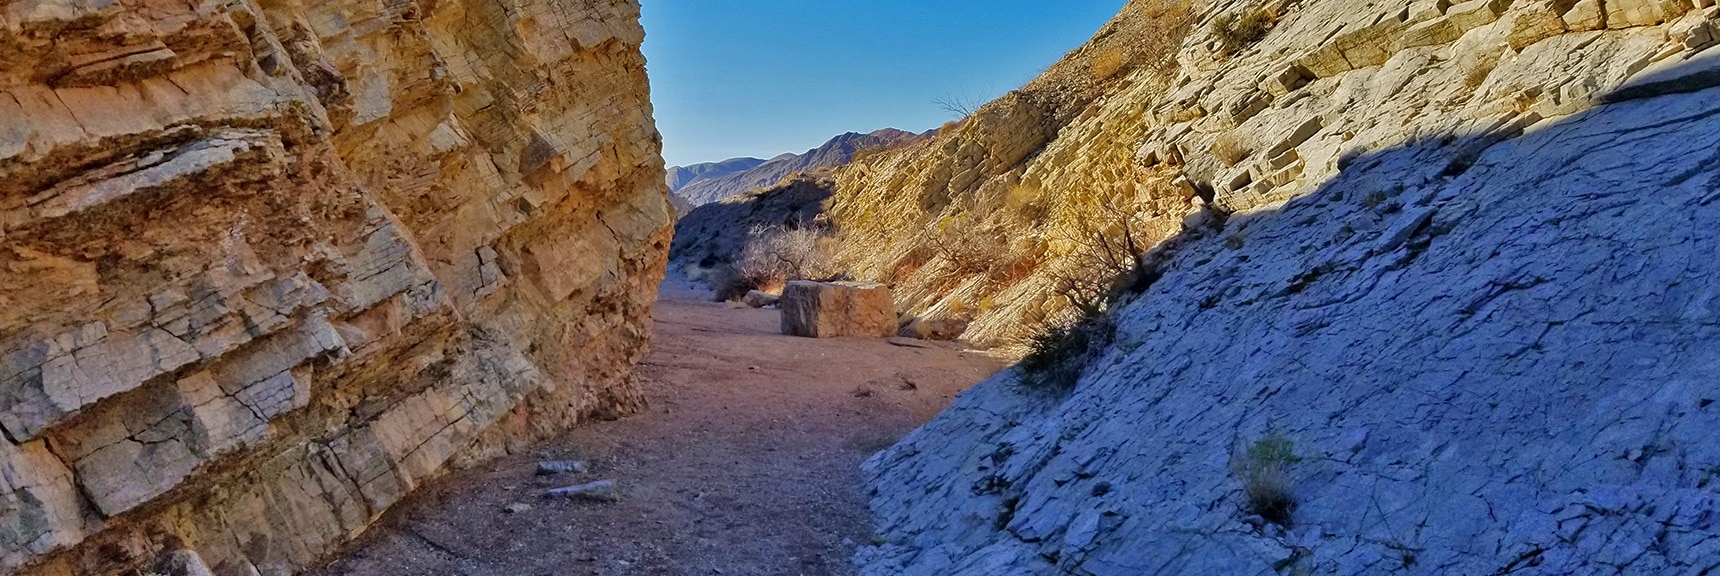 Return Pass Through A Narrow Channel in the Main Wash Above Northshore Mile 18 | Hamblin Mountain, Lake Mead National Conservation Area, Nevada